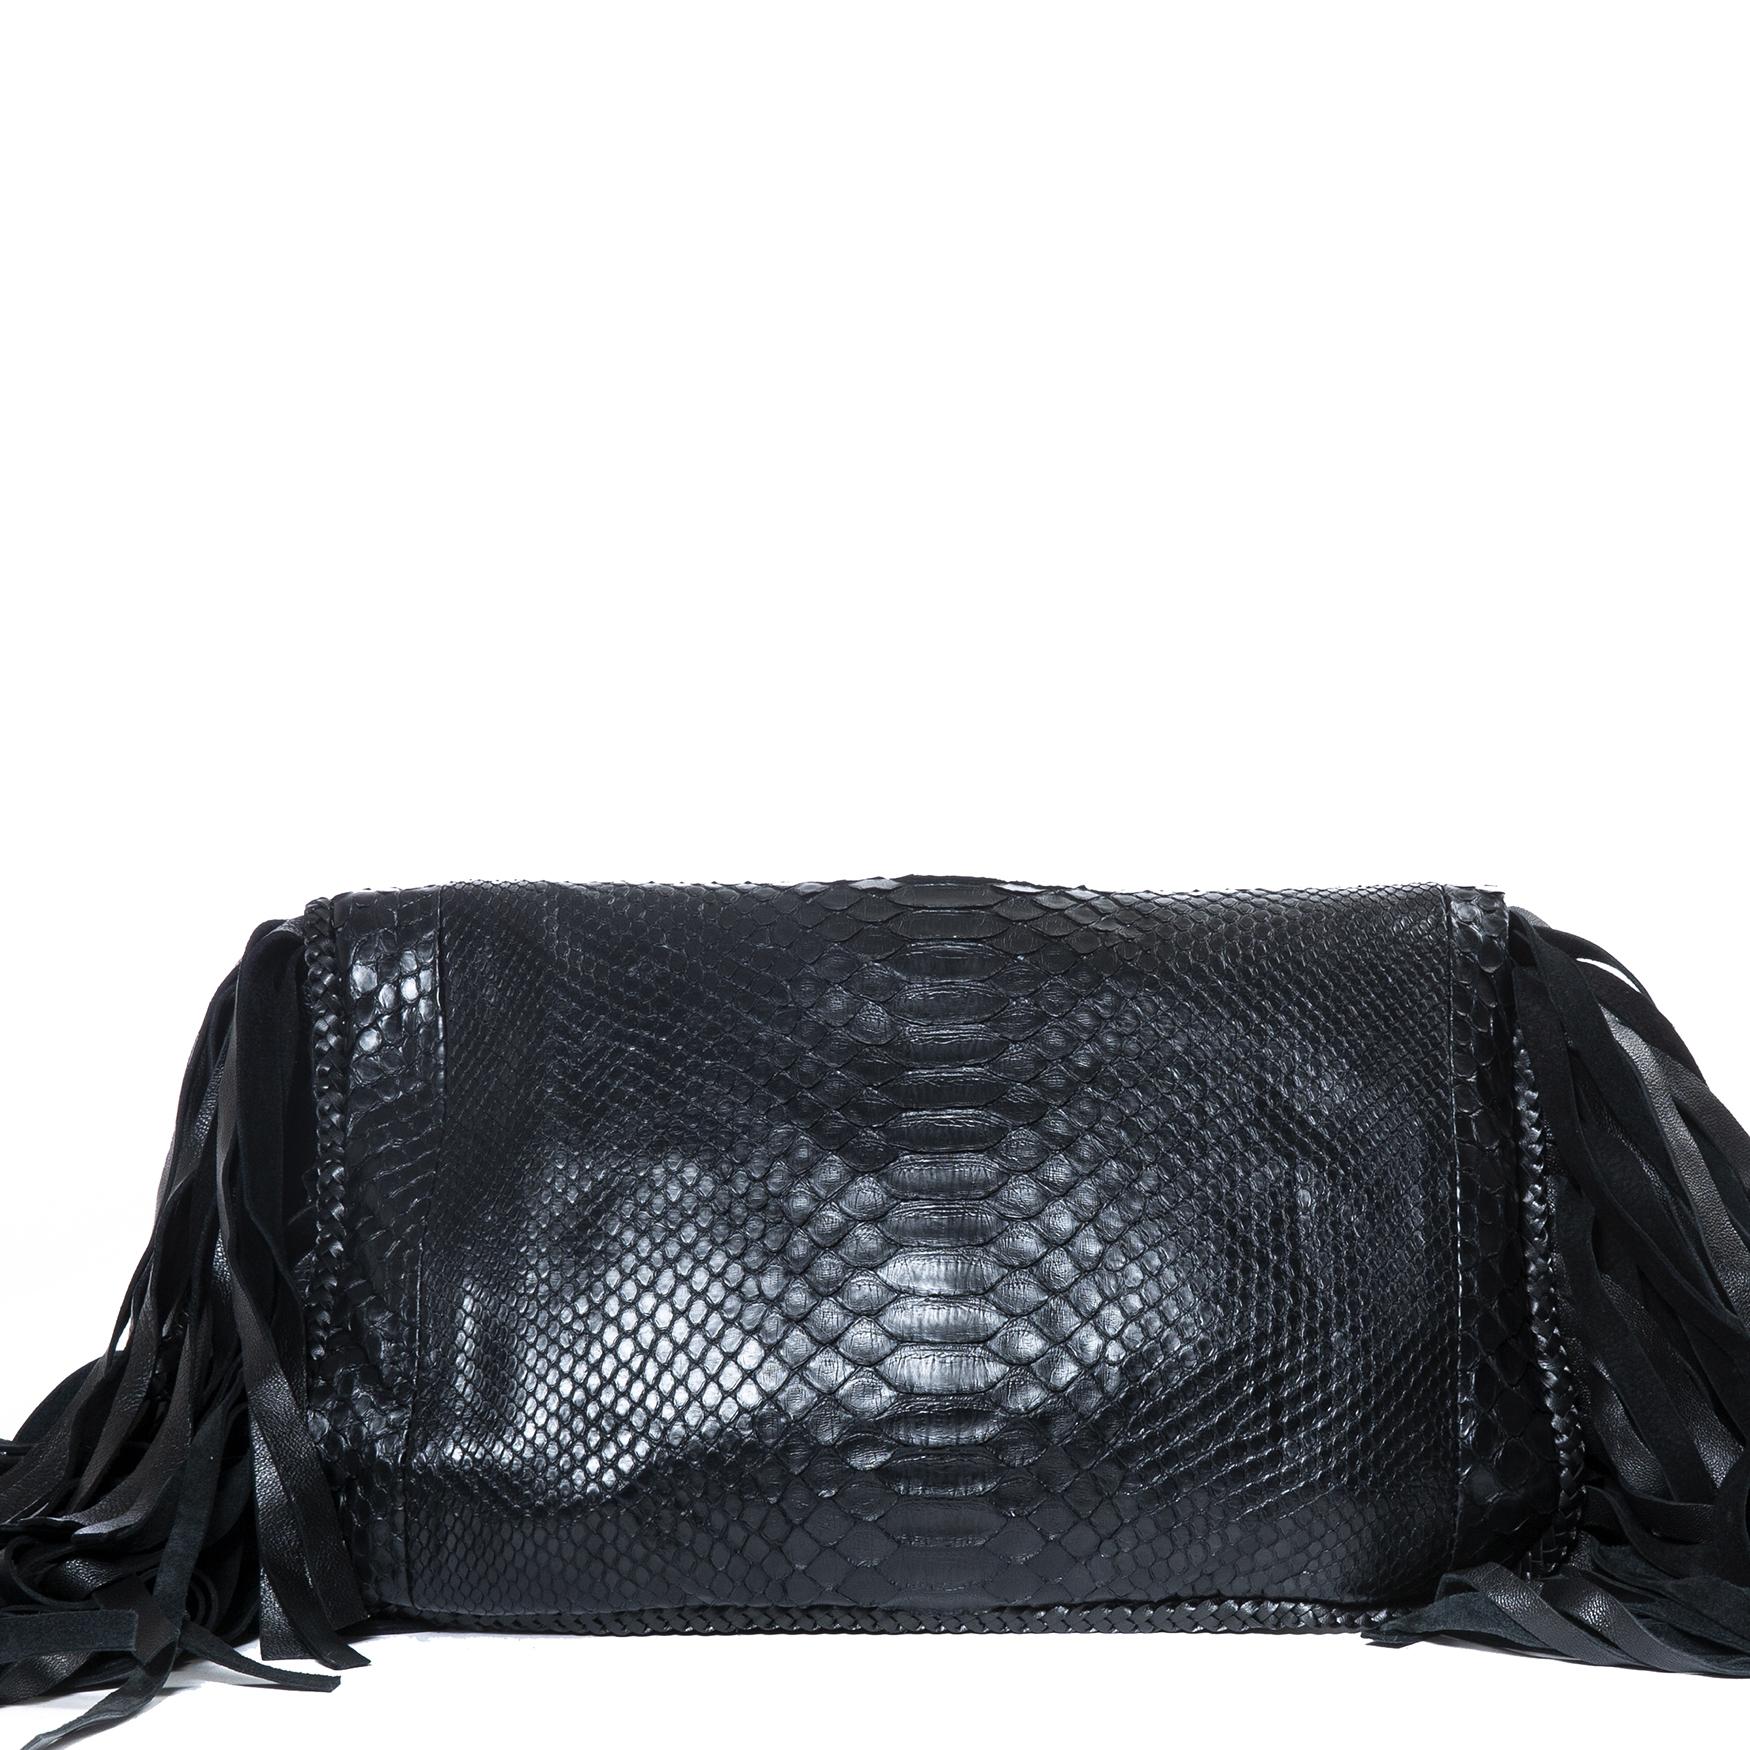 Mina Vatter Black Fringe Clutch In Excellent Condition For Sale In Antwerp, BE